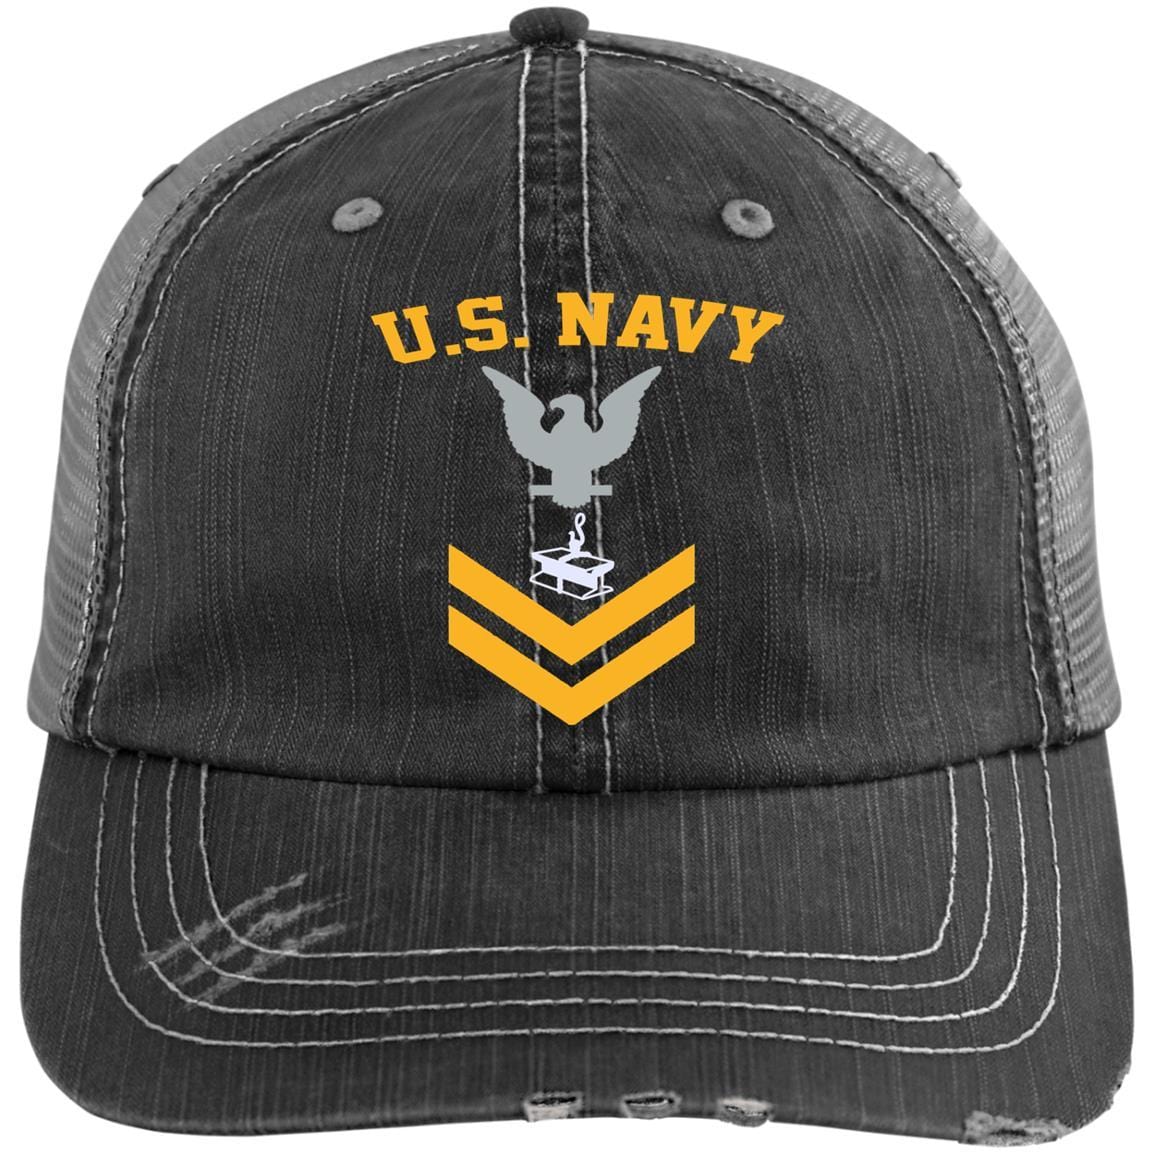 Us Navy Steelworker Sw E-5 Rating Badges Gold Stripe Printed Distressed Unstructured Trucker Cap